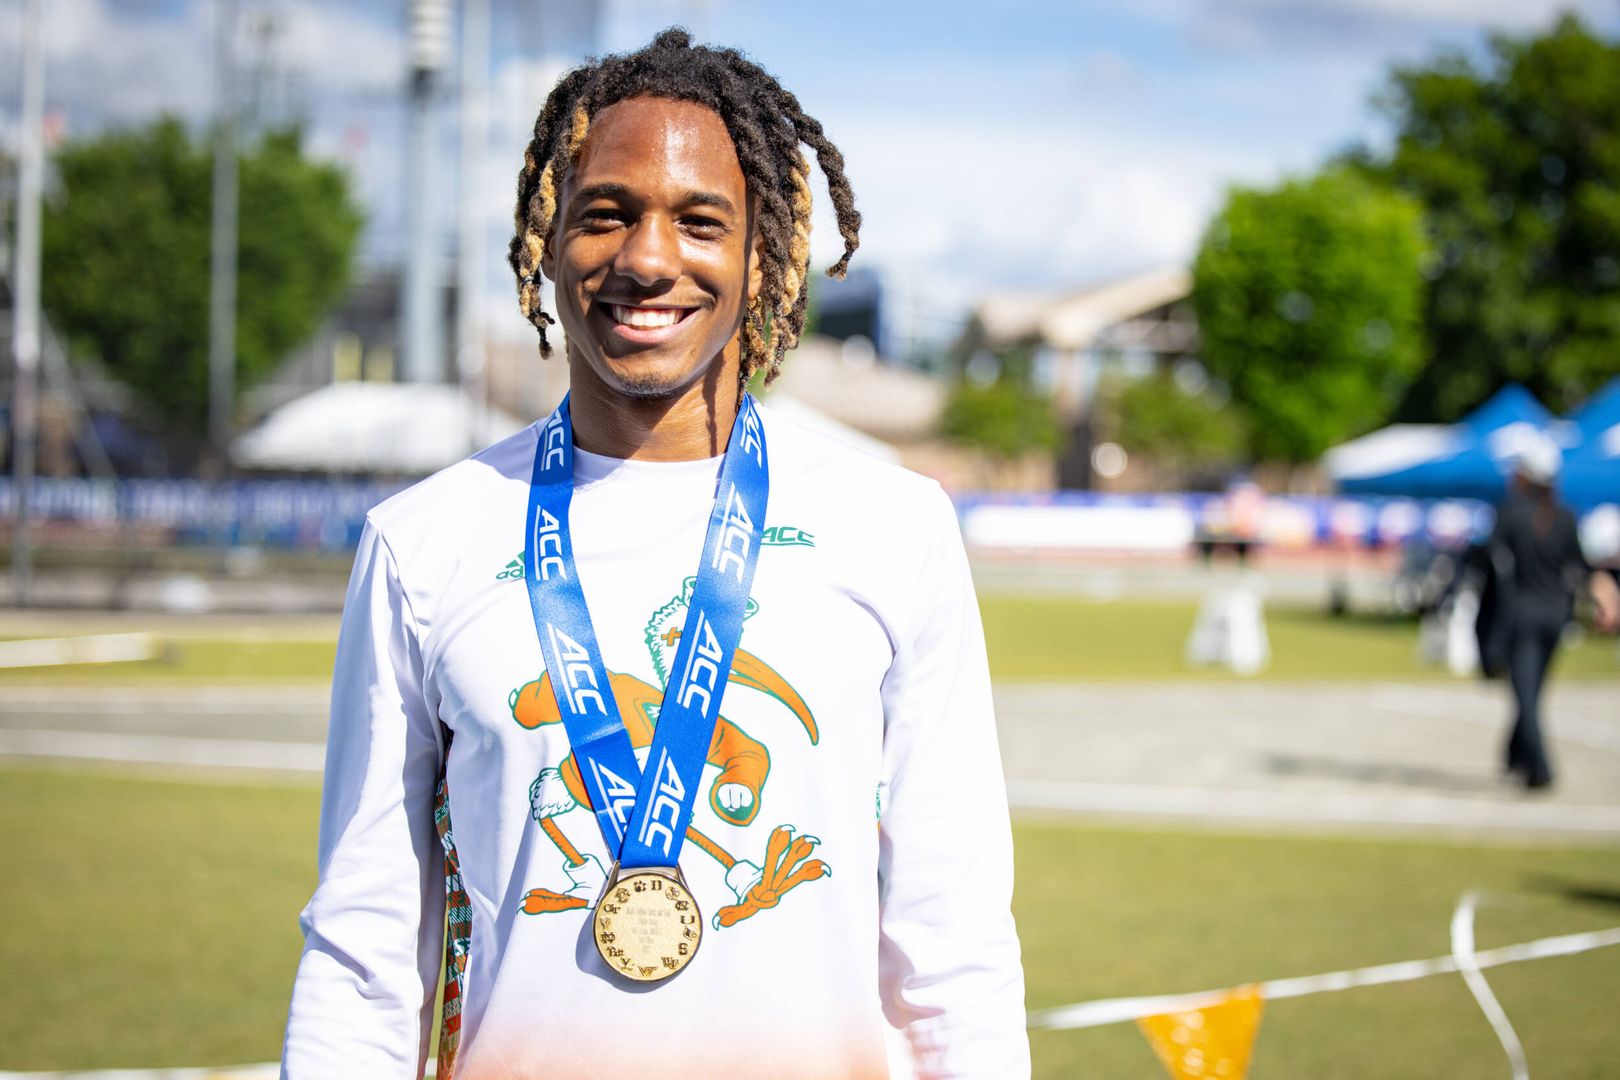 Robinson Wins ACC Gold Medal in Triple Jump on Day 2